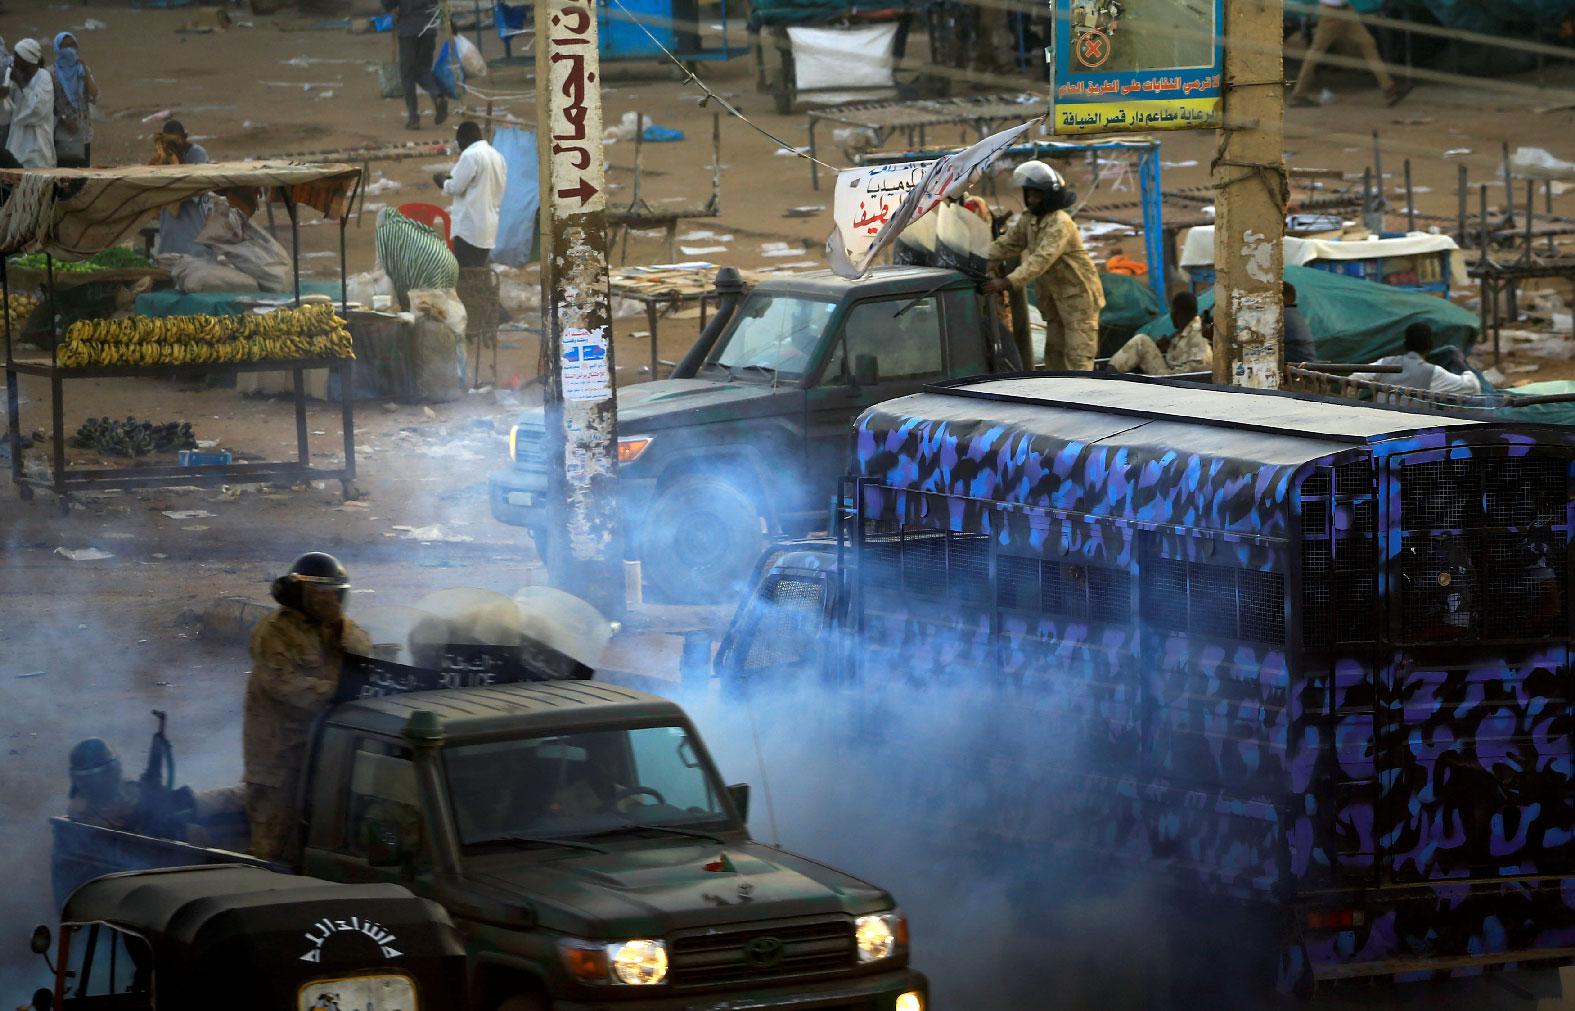 A tear gas canister is fired to disperse Sudanese demonstrators during anti-government protests in the outskirts of Khartoum, Sudan January 15, 2019..